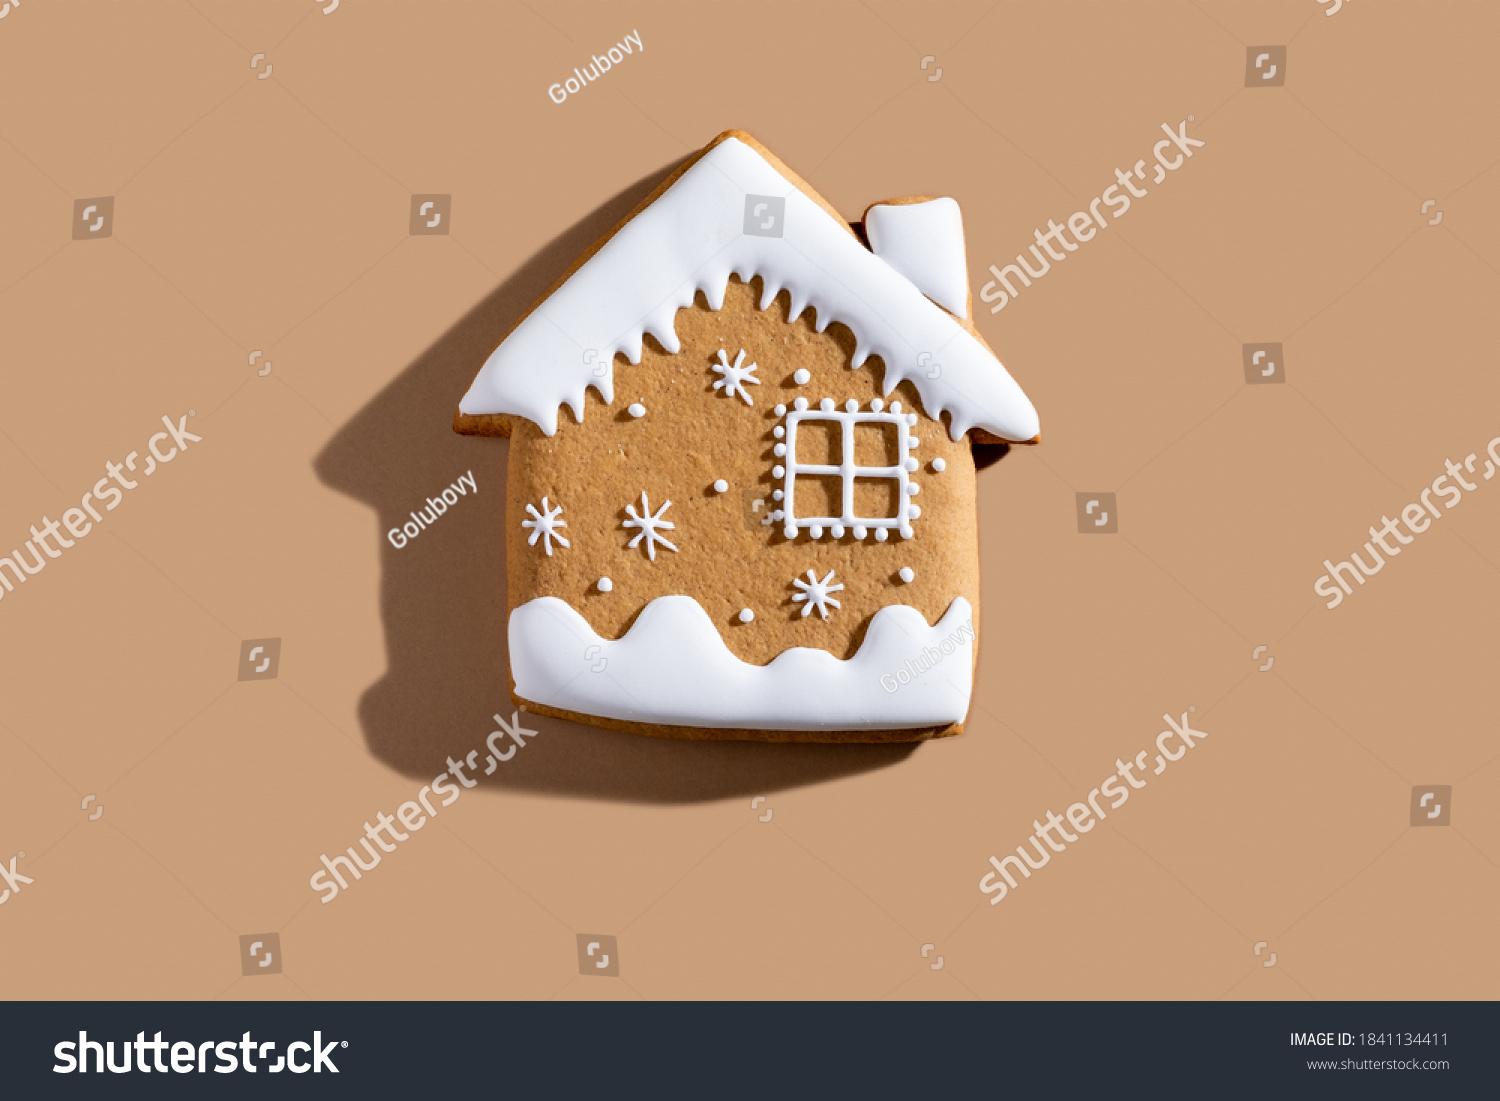 Christmas bakery. Festive traditional cookies. Homemade culinary. Gingerbread biscuit figure house with white icing ornament isolated on beige pastel background. #1841134411